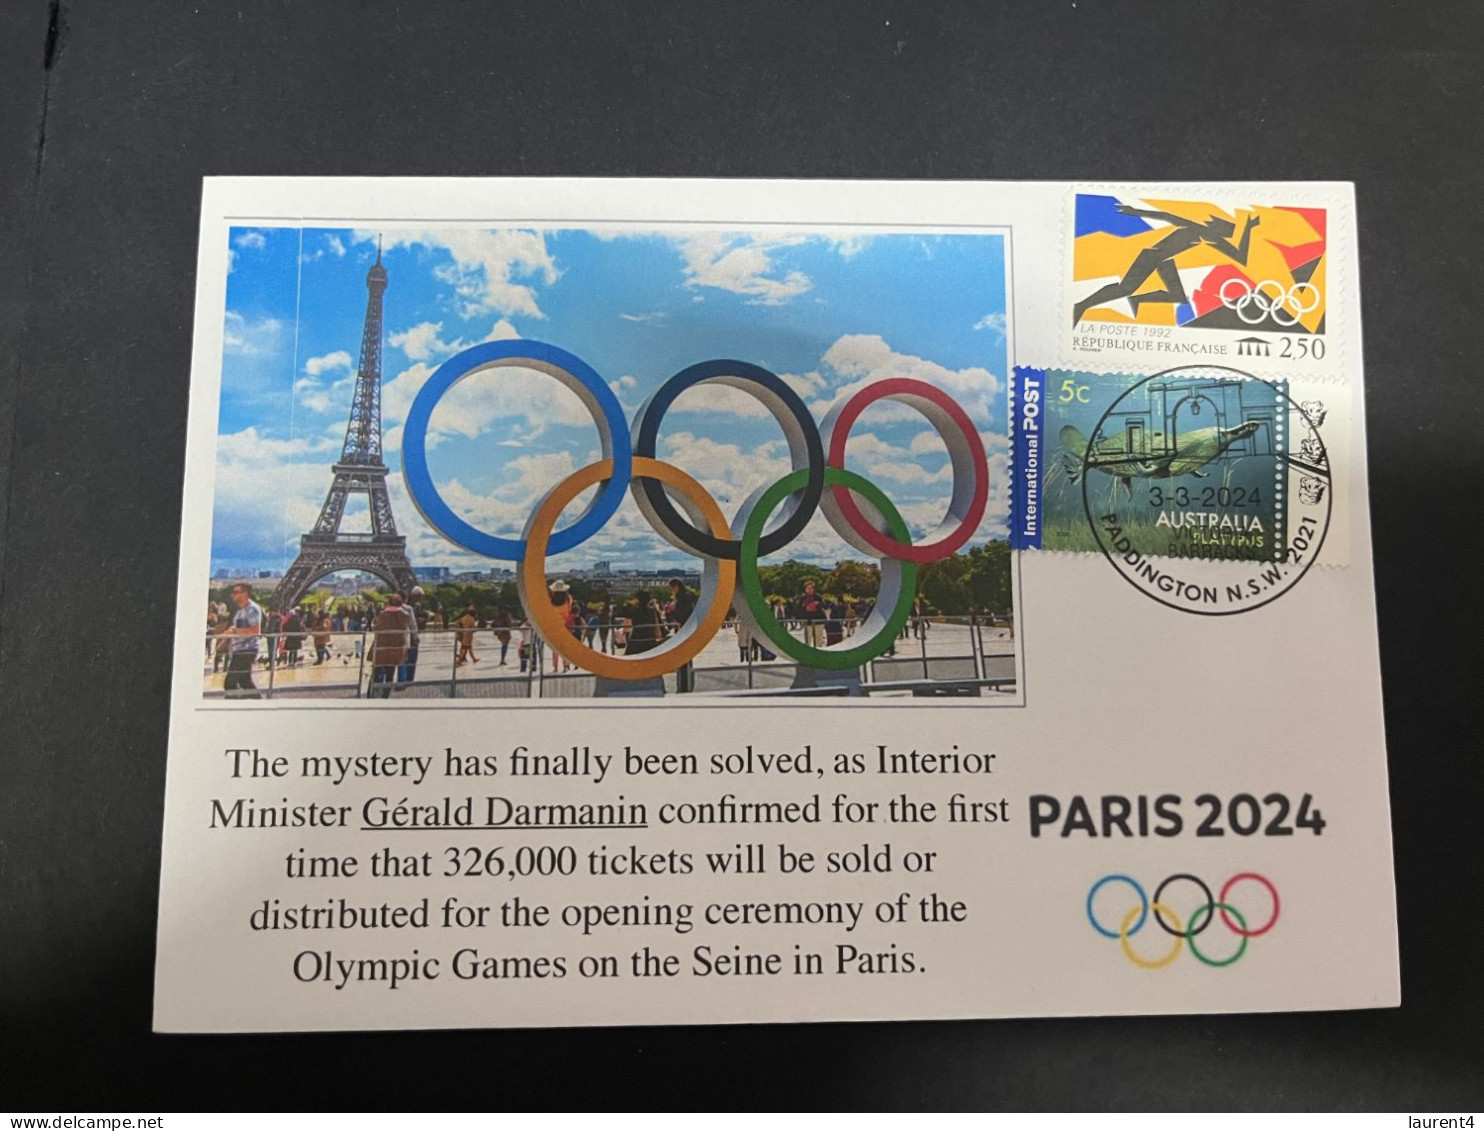 7-3-2024 (2 Y 22) Paris 2024 Summer Olympic - 326,000 Tickets Available To The Games Opening Ceremony On Seine River - Eté 2024 : Paris